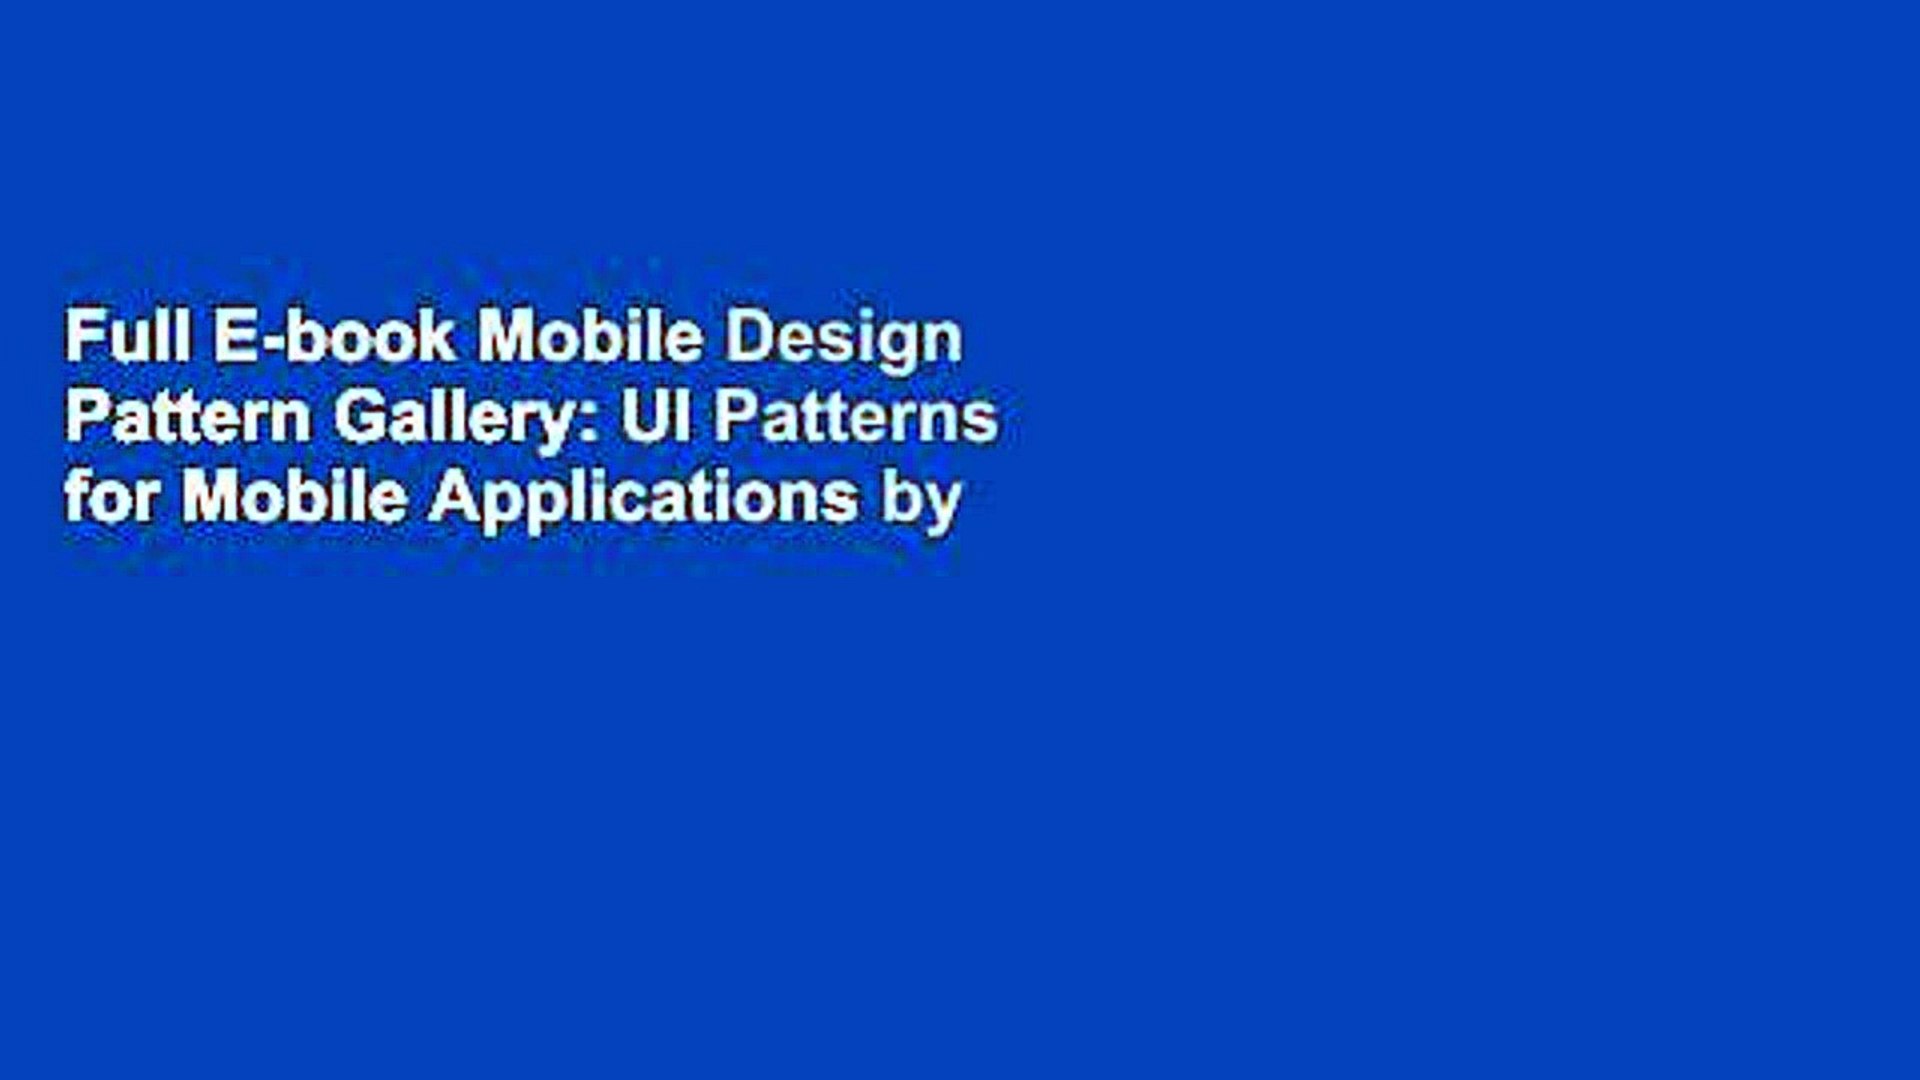 Full E-book Mobile Design Pattern Gallery: UI Patterns for Mobile Applications by Theresa Neil